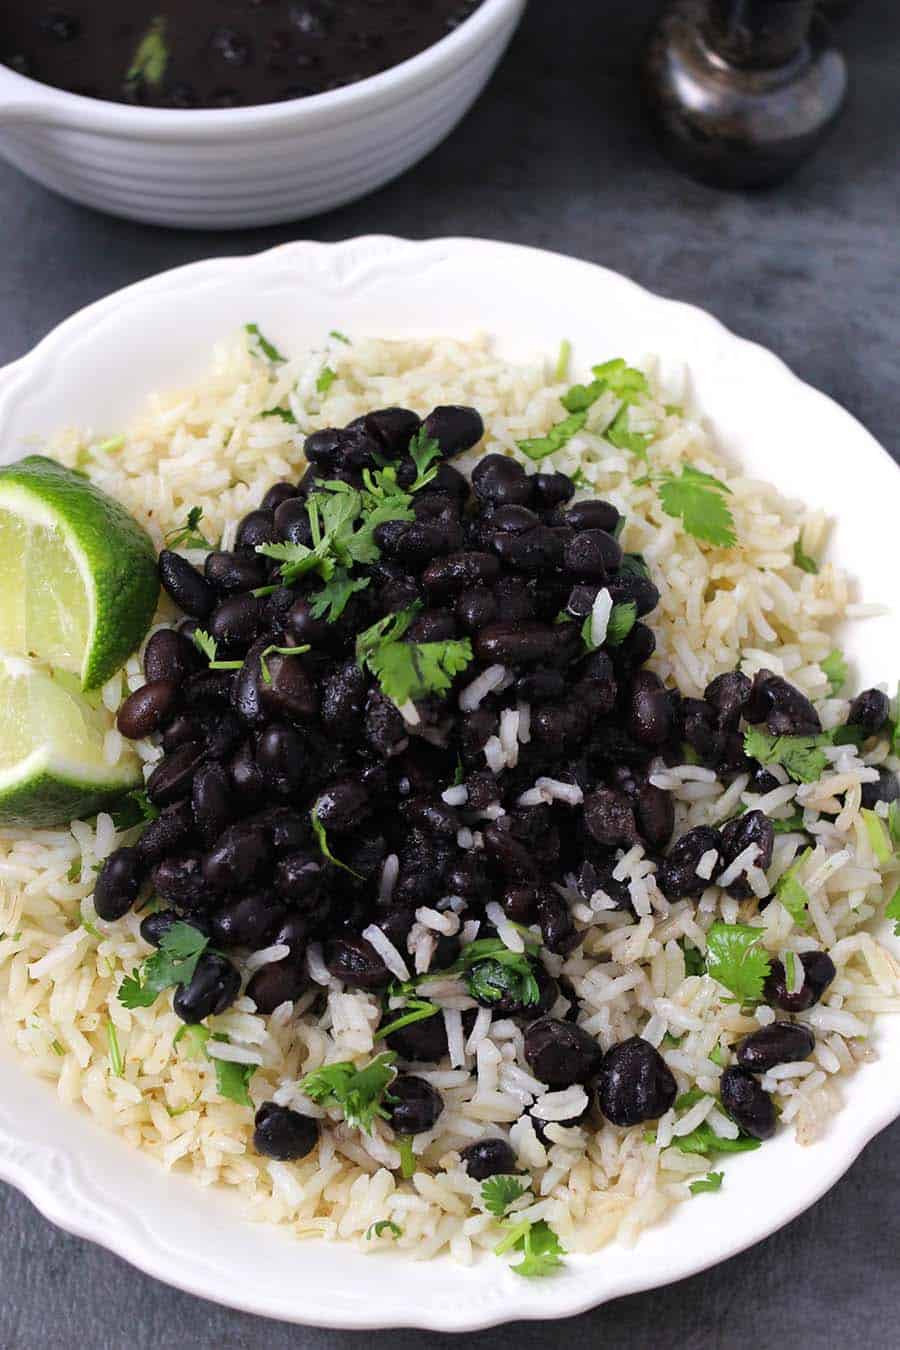 How to make cilantro lime rice like chipotle, chipotle cauliflower lime rice, mexican rice ingredients, instant pot chipotle rice, lemon coriander rice, easy rice recipes for lunch and dinner, vegetarian, vegan, gluten free and keto diet, brown rice, white rice